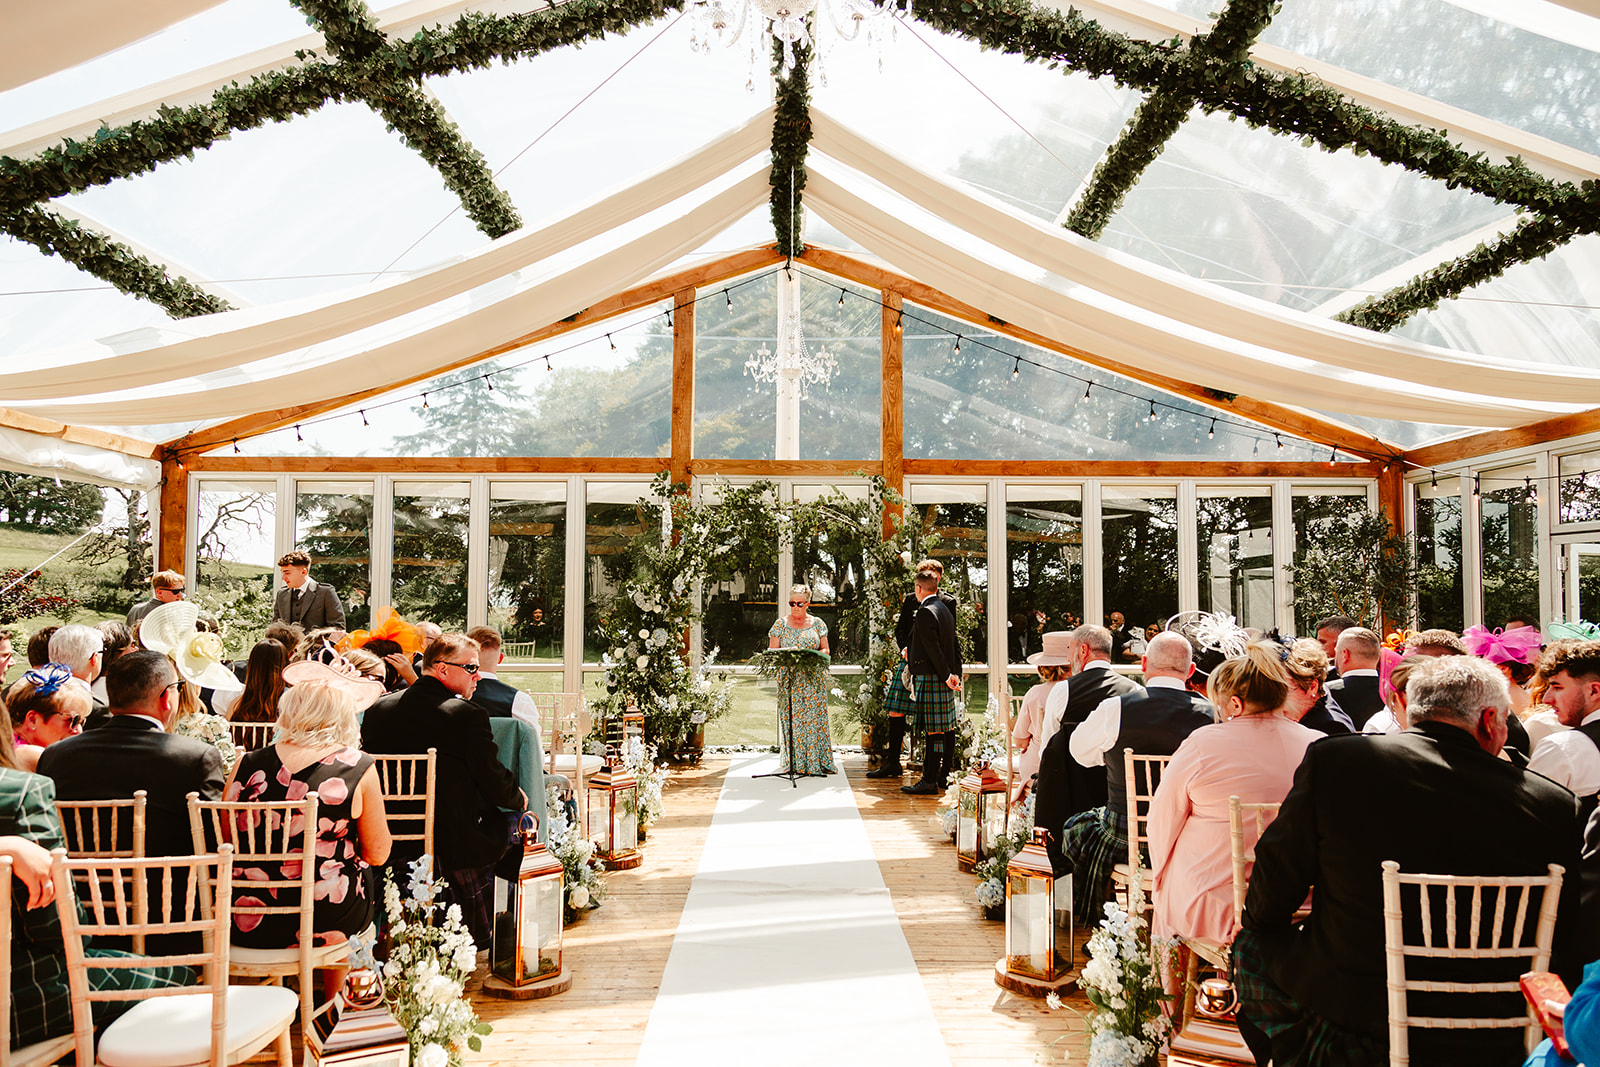 Wedding ceremony at Elrick House Wedding Venue - filled with rustic greenery